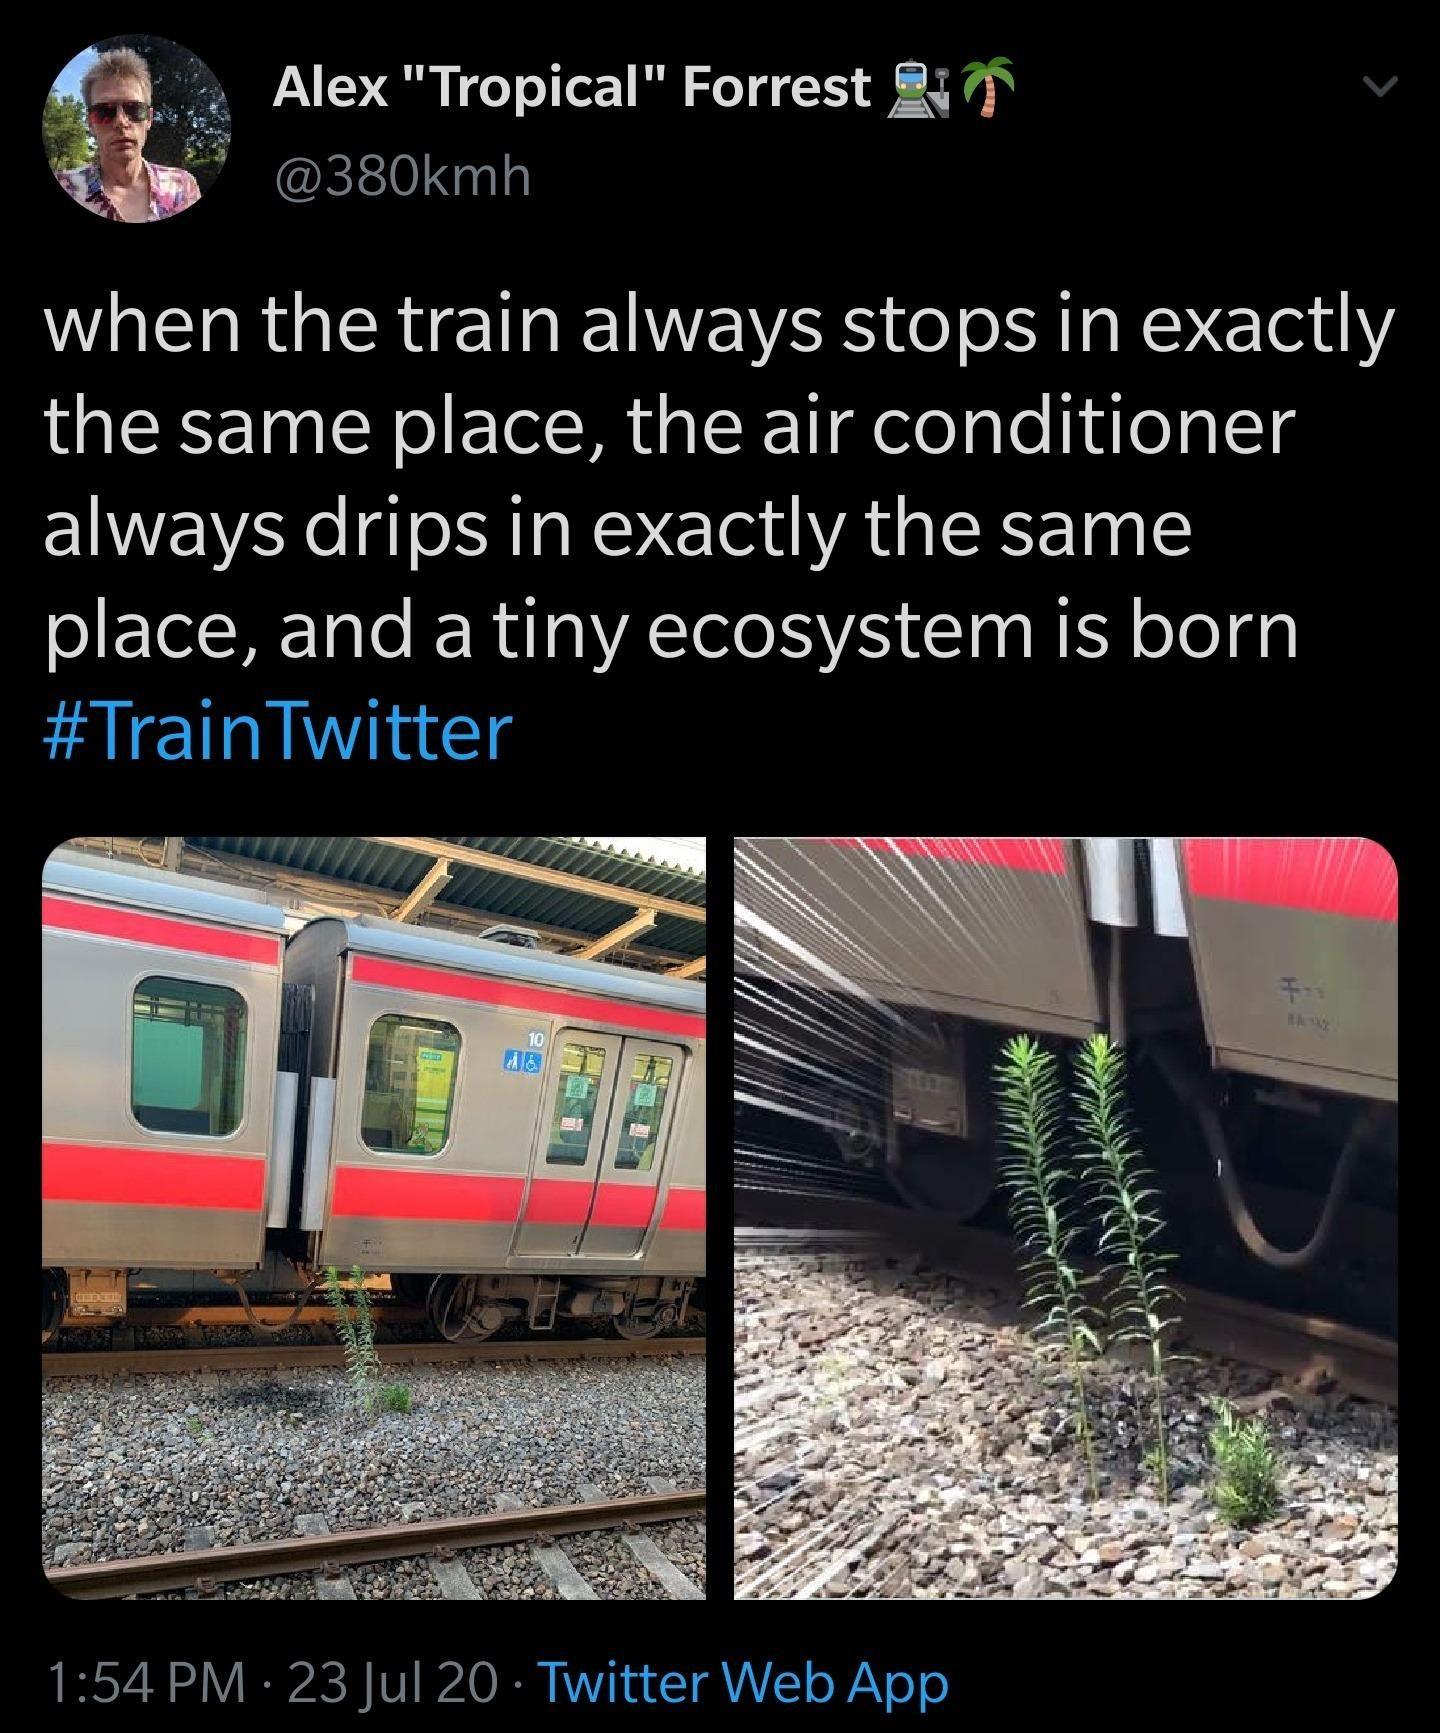 Alex "Tropical" Forrest in when the train always stops in exactly the same place, the air conditioner always drips in exactly the same place, and a tiny ecosystem is born Twitter 10 52 23 Jul 20 Twitter Web App